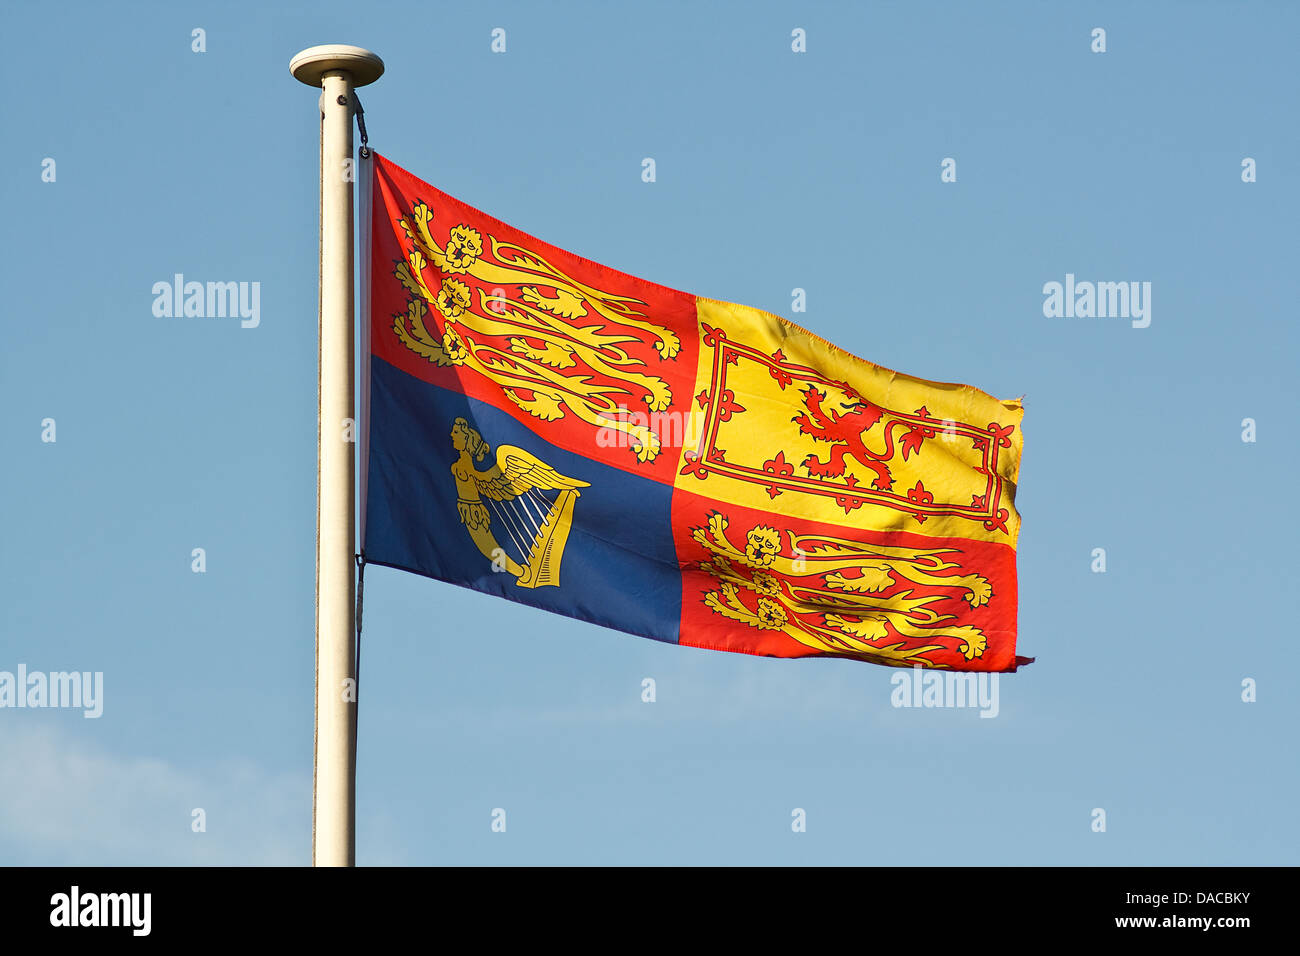 The Traditional Royal Standard Flag ripples in the wind on flagpole Stock Photo